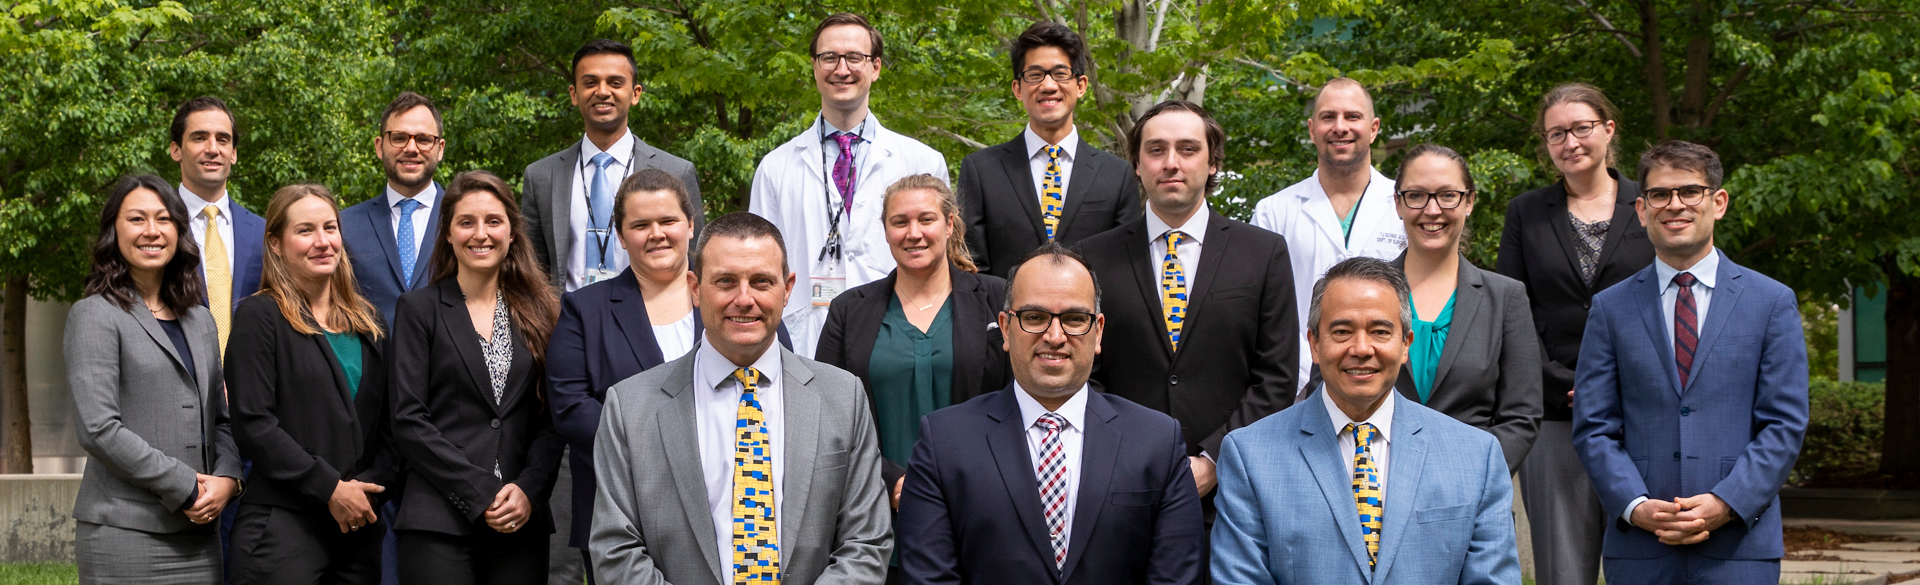 Group photo of surgical residents and faculty